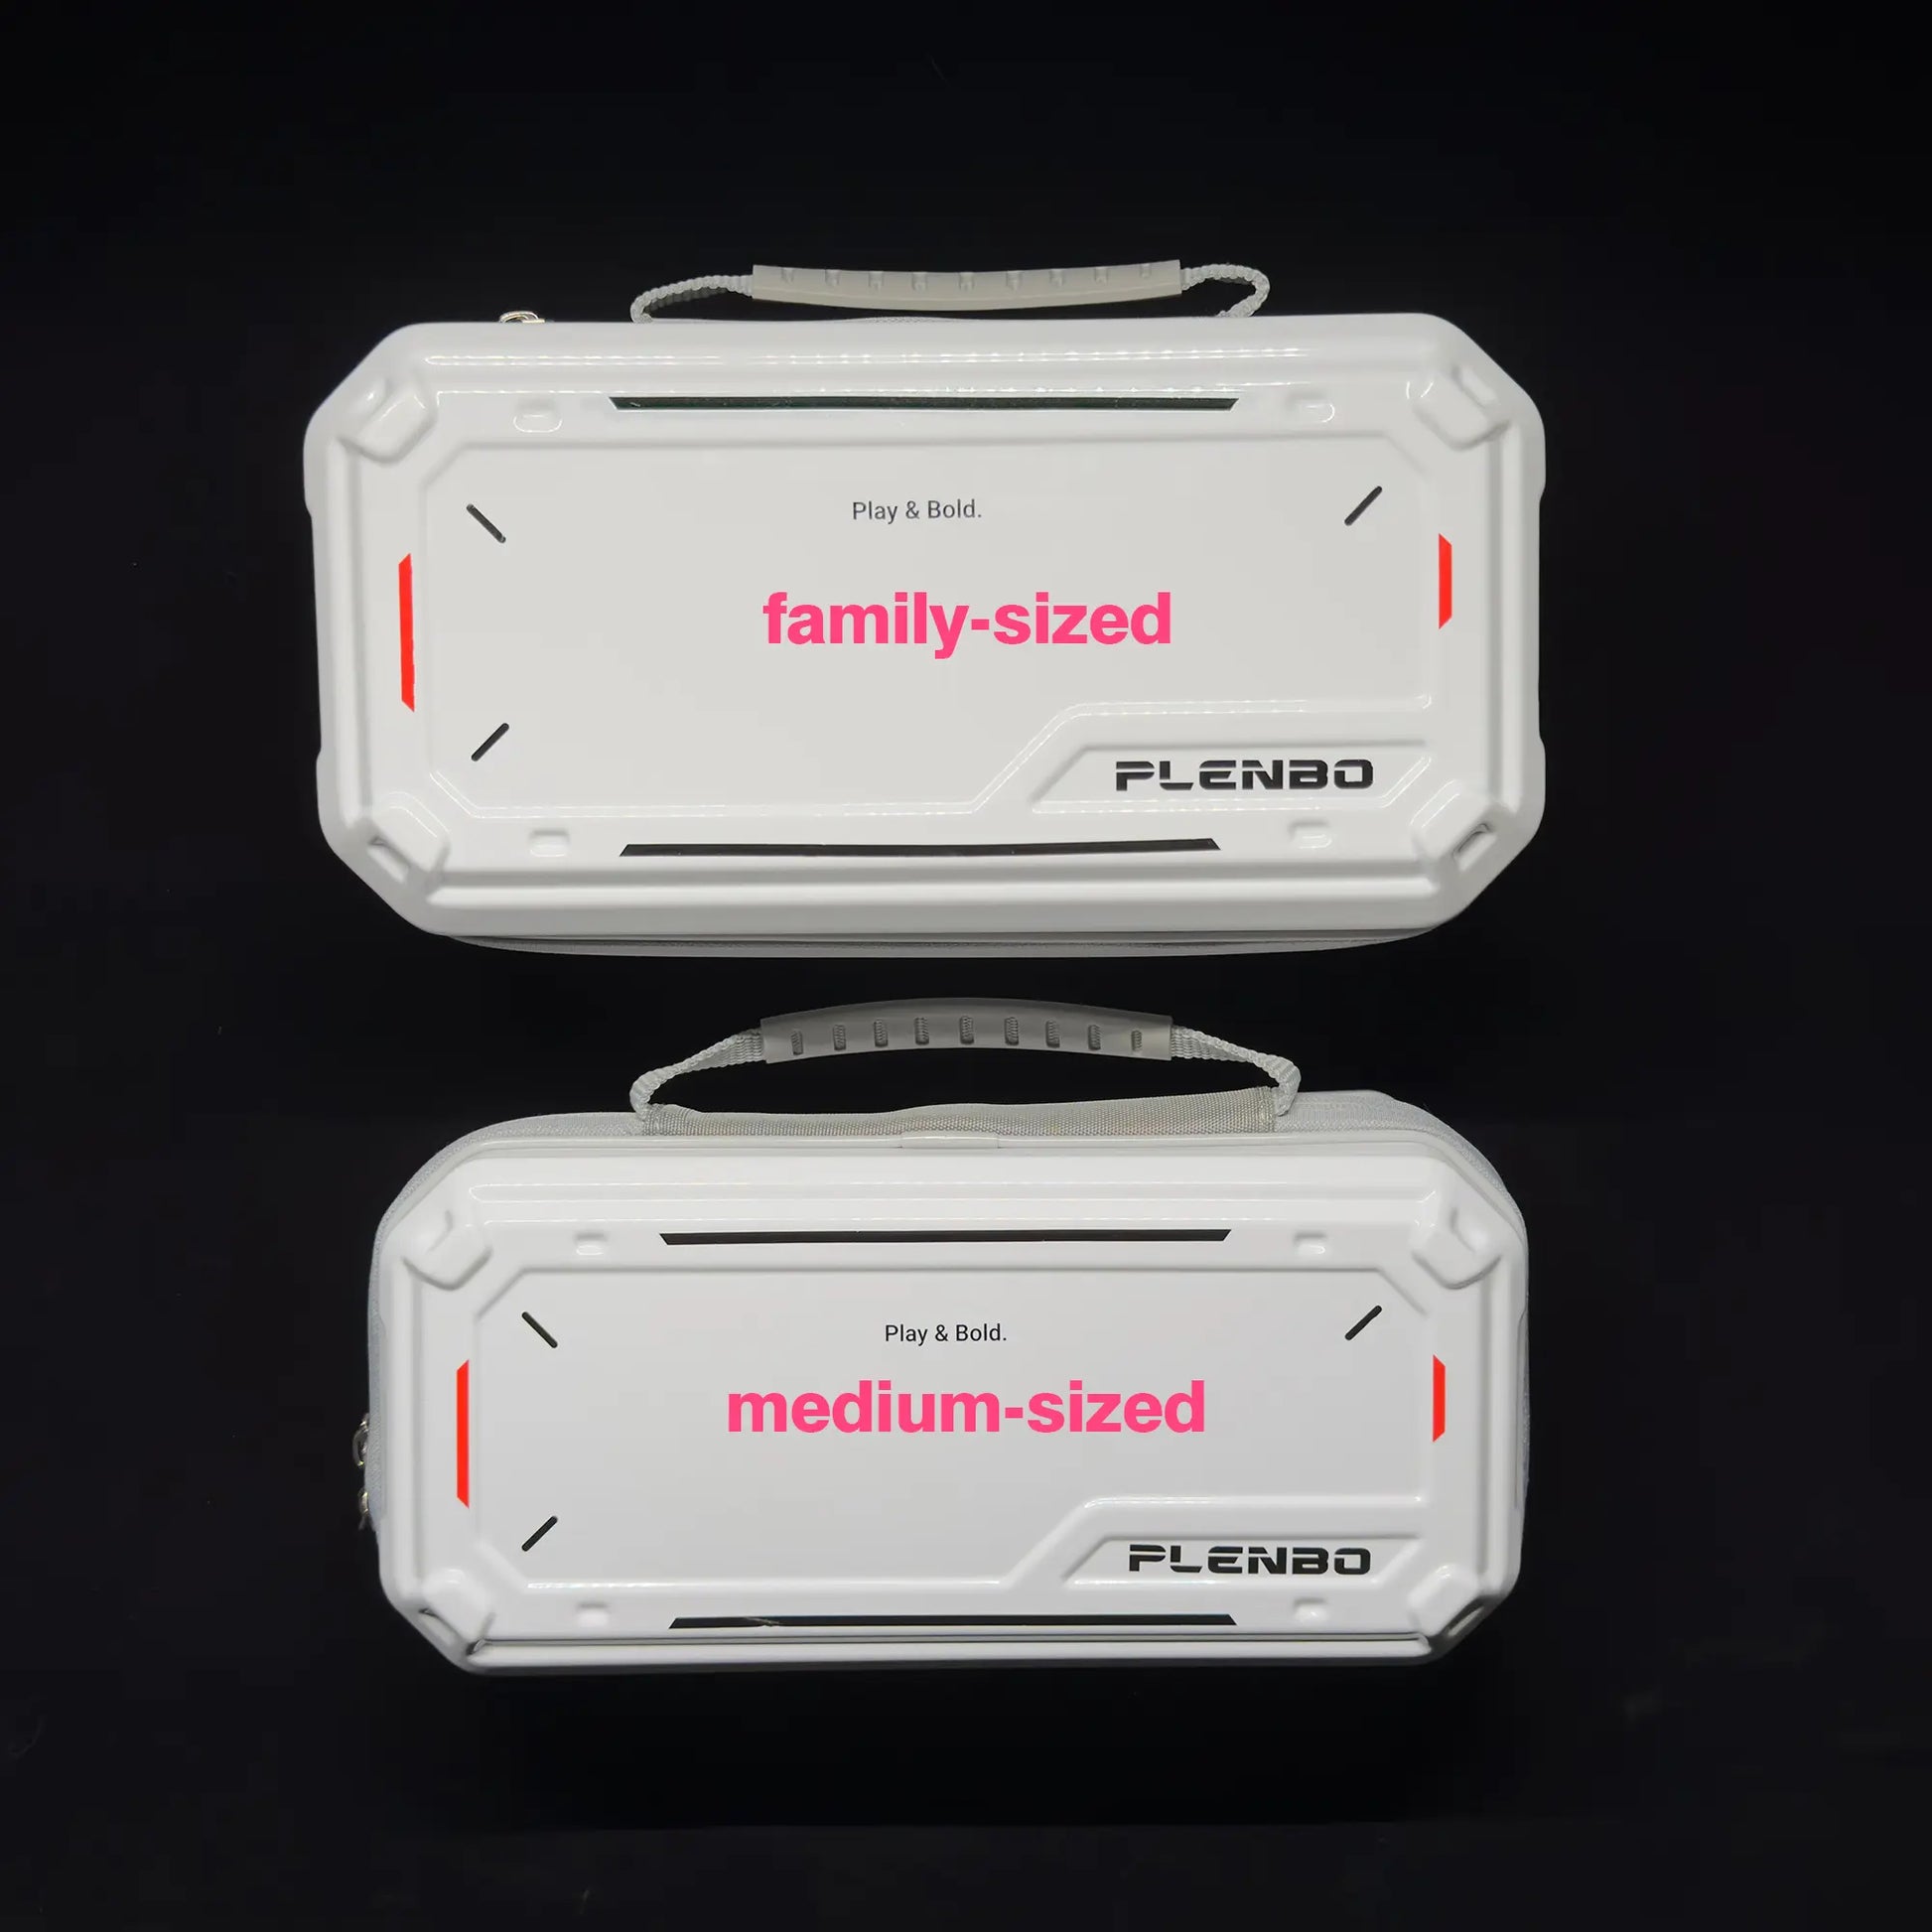 comparison between family and medium size